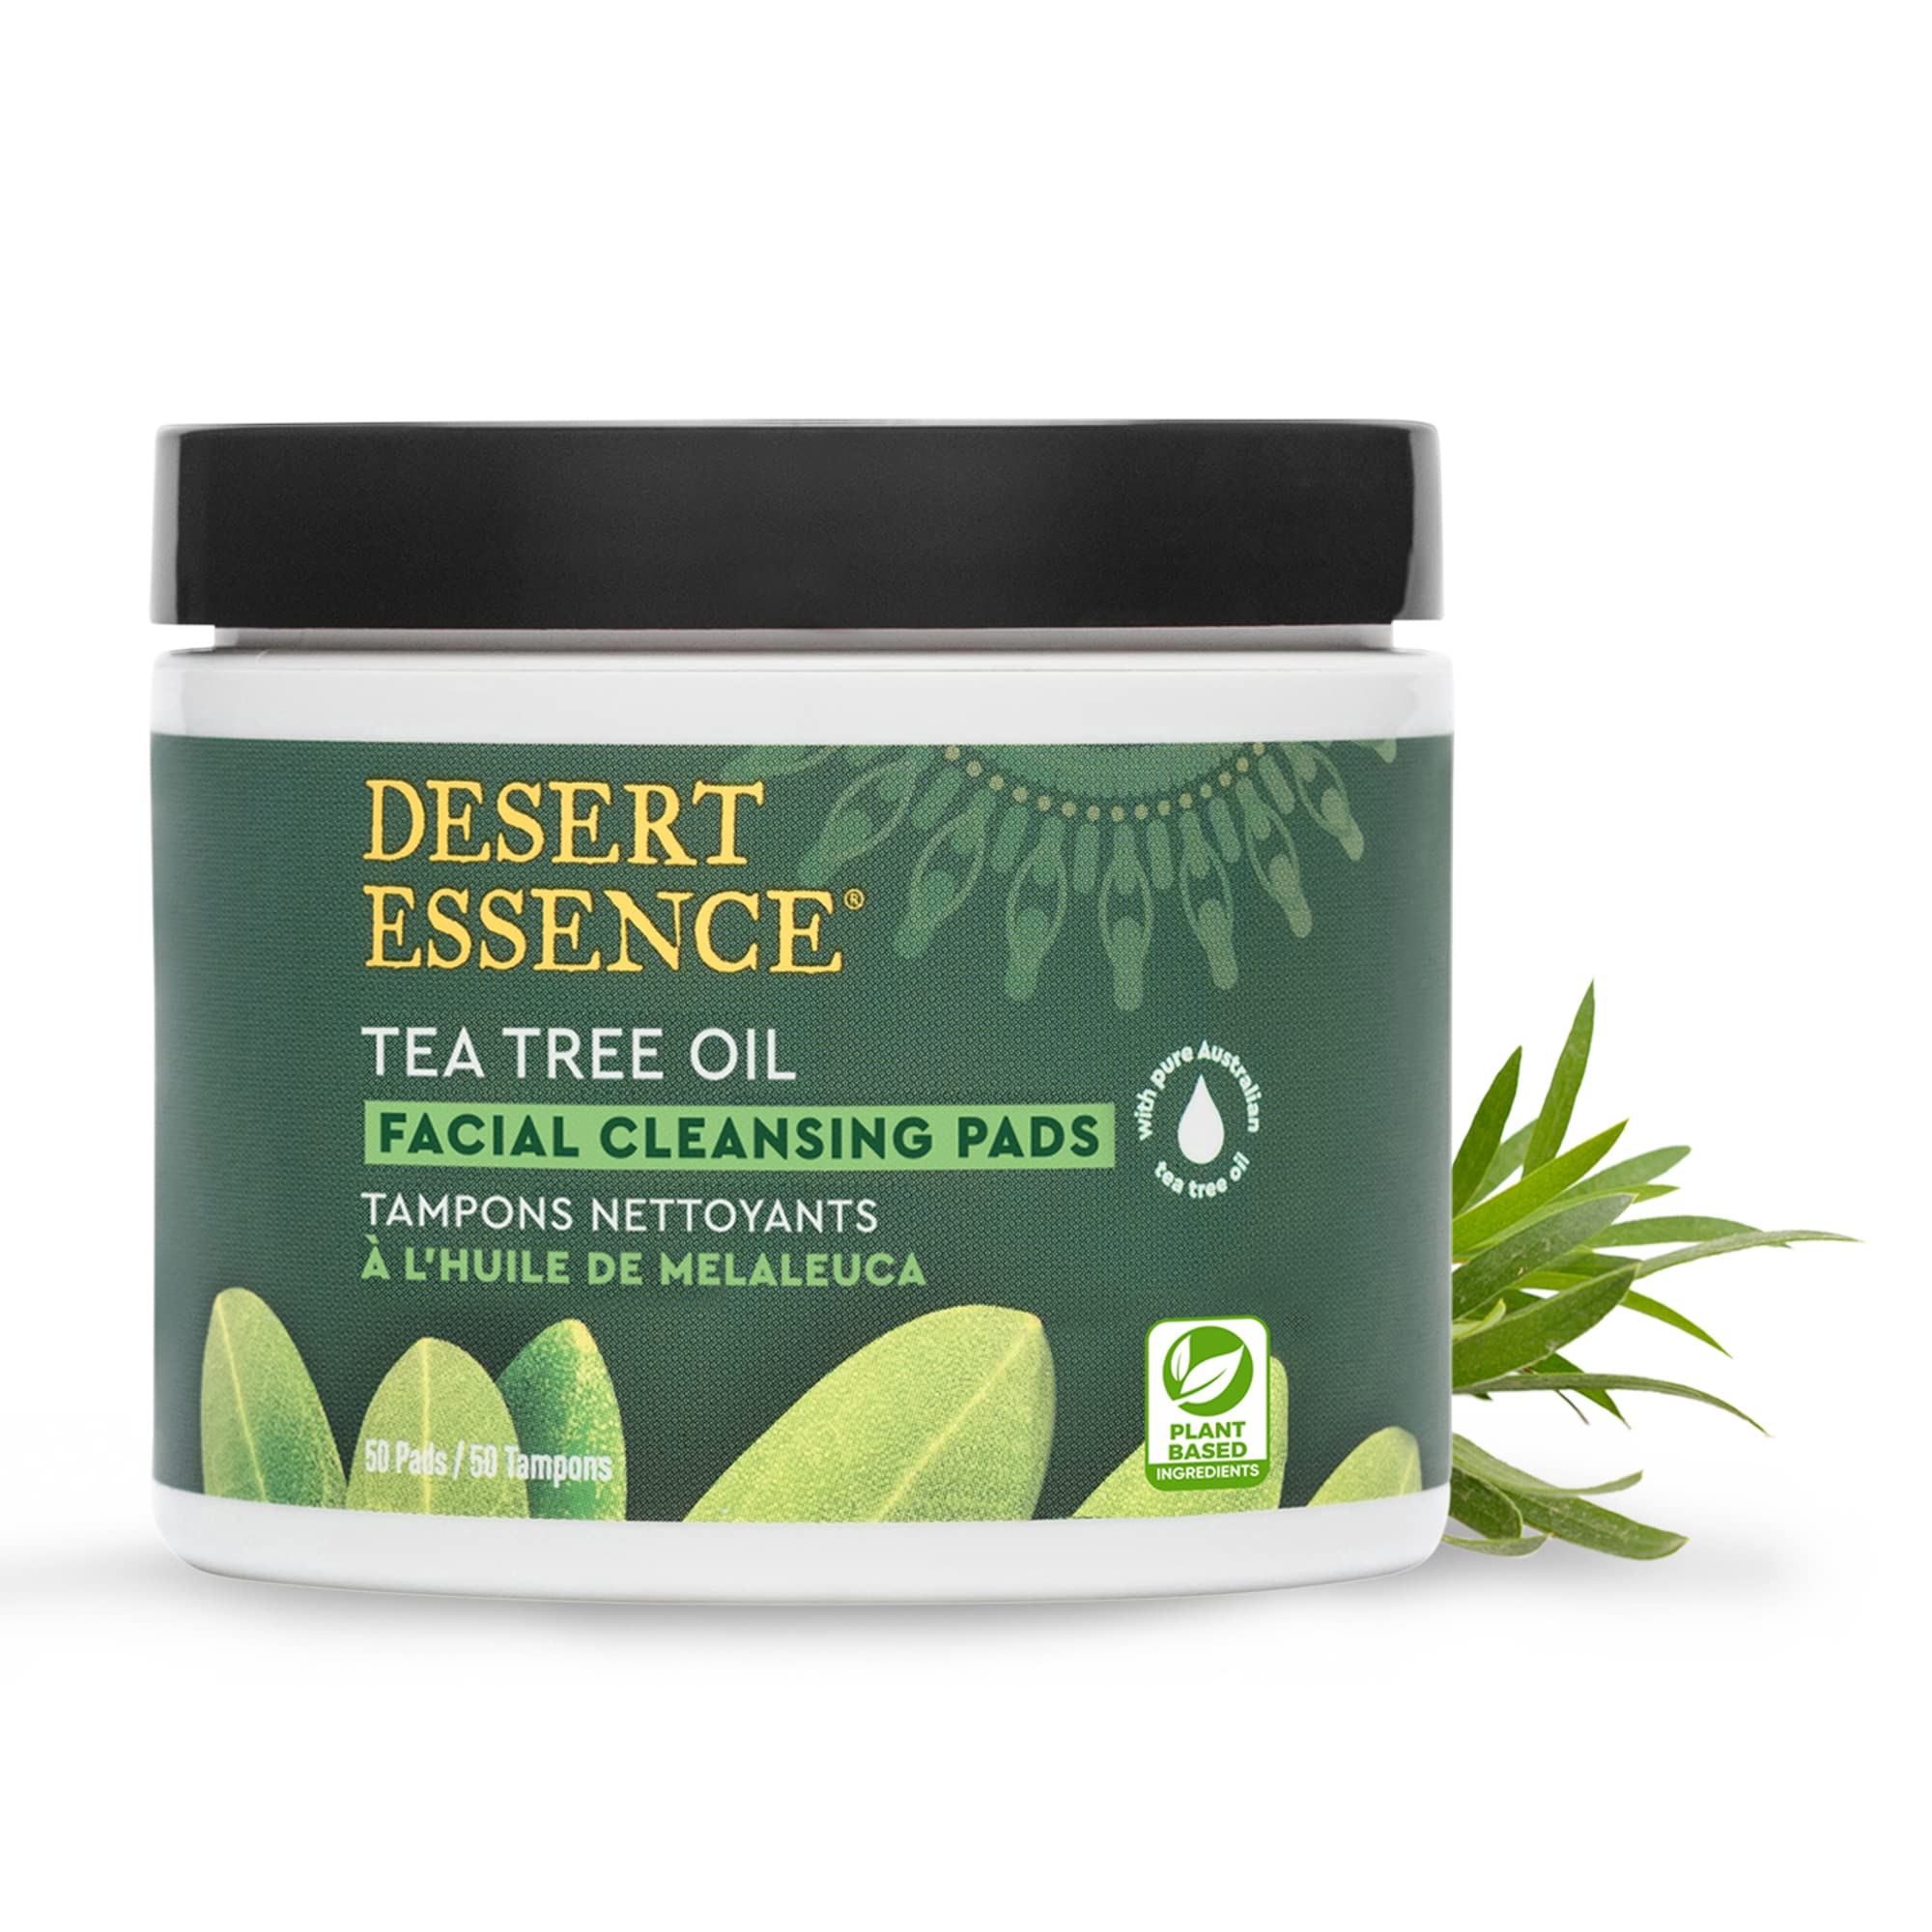 Desert Essence, Daily Facial Cleansing Pads with Tea Tree Oil, Removes Dirt & Oil